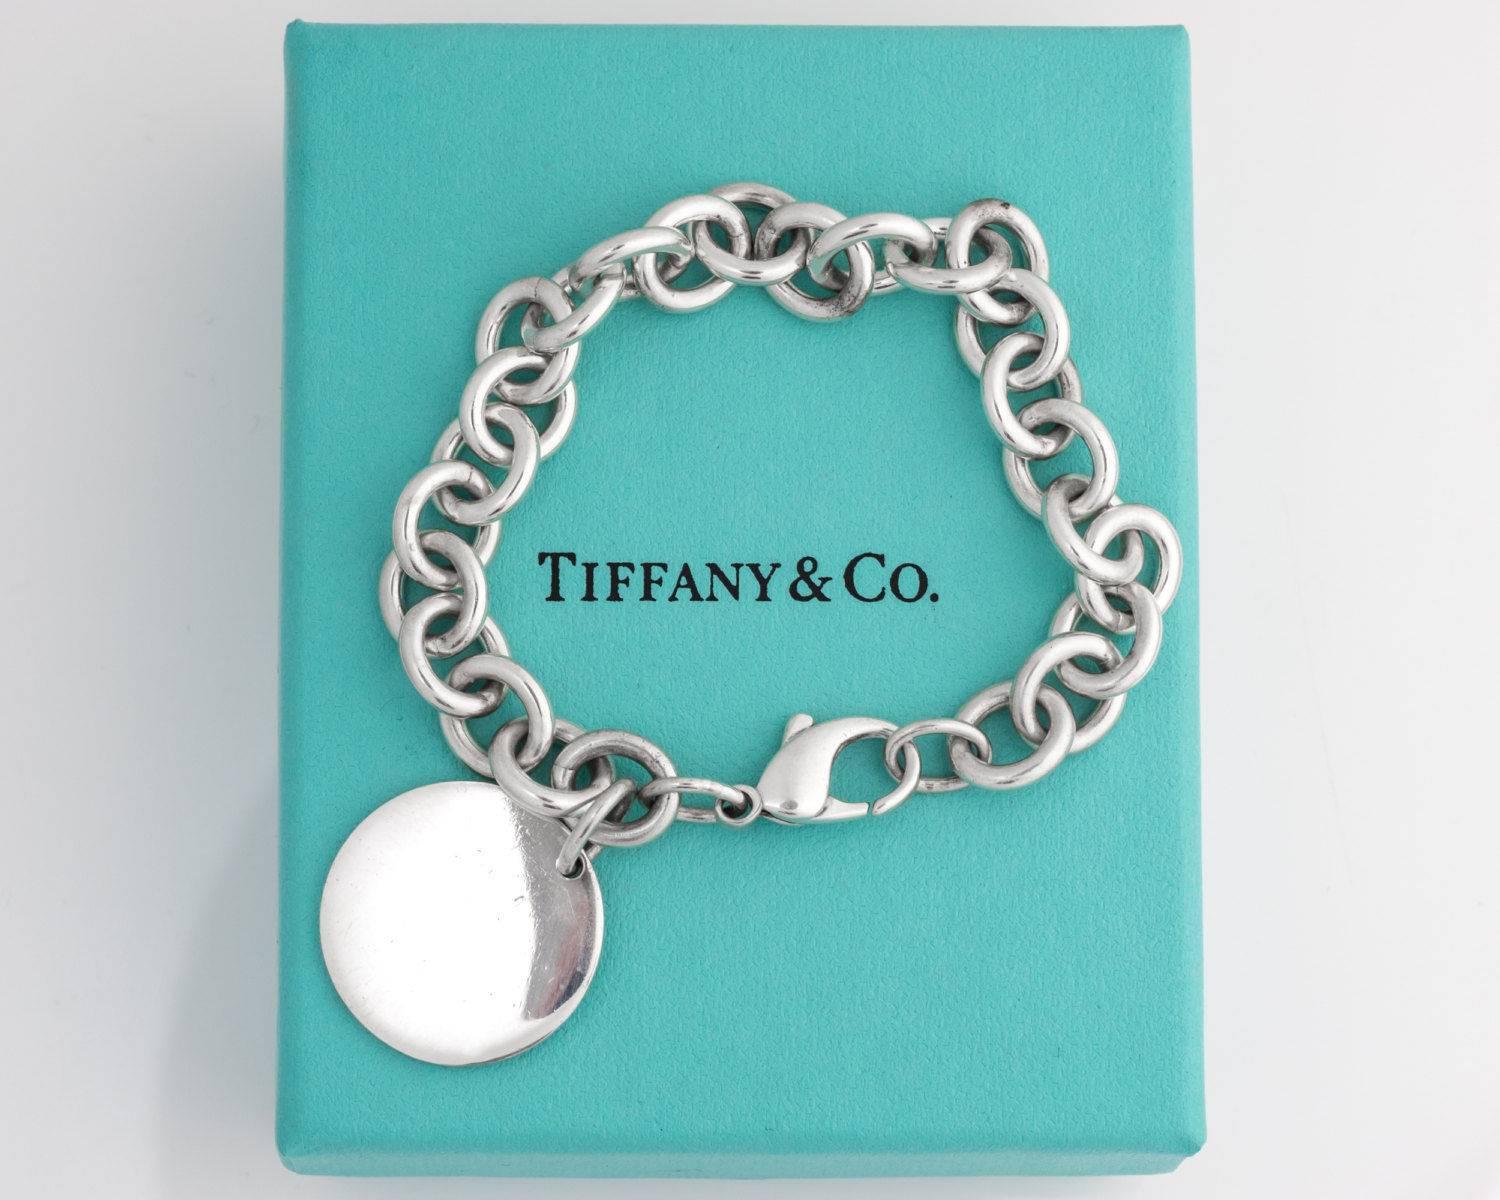 Tiffany and Co. Return to Tiffany Round Tag Bracelet - Sterling Silver

Features round open links and a Return to Tiffany Round Tag charm. Crafted from Sterling Silver, this classic bracelet fastens with a lobster claw closure. 

This beautiful